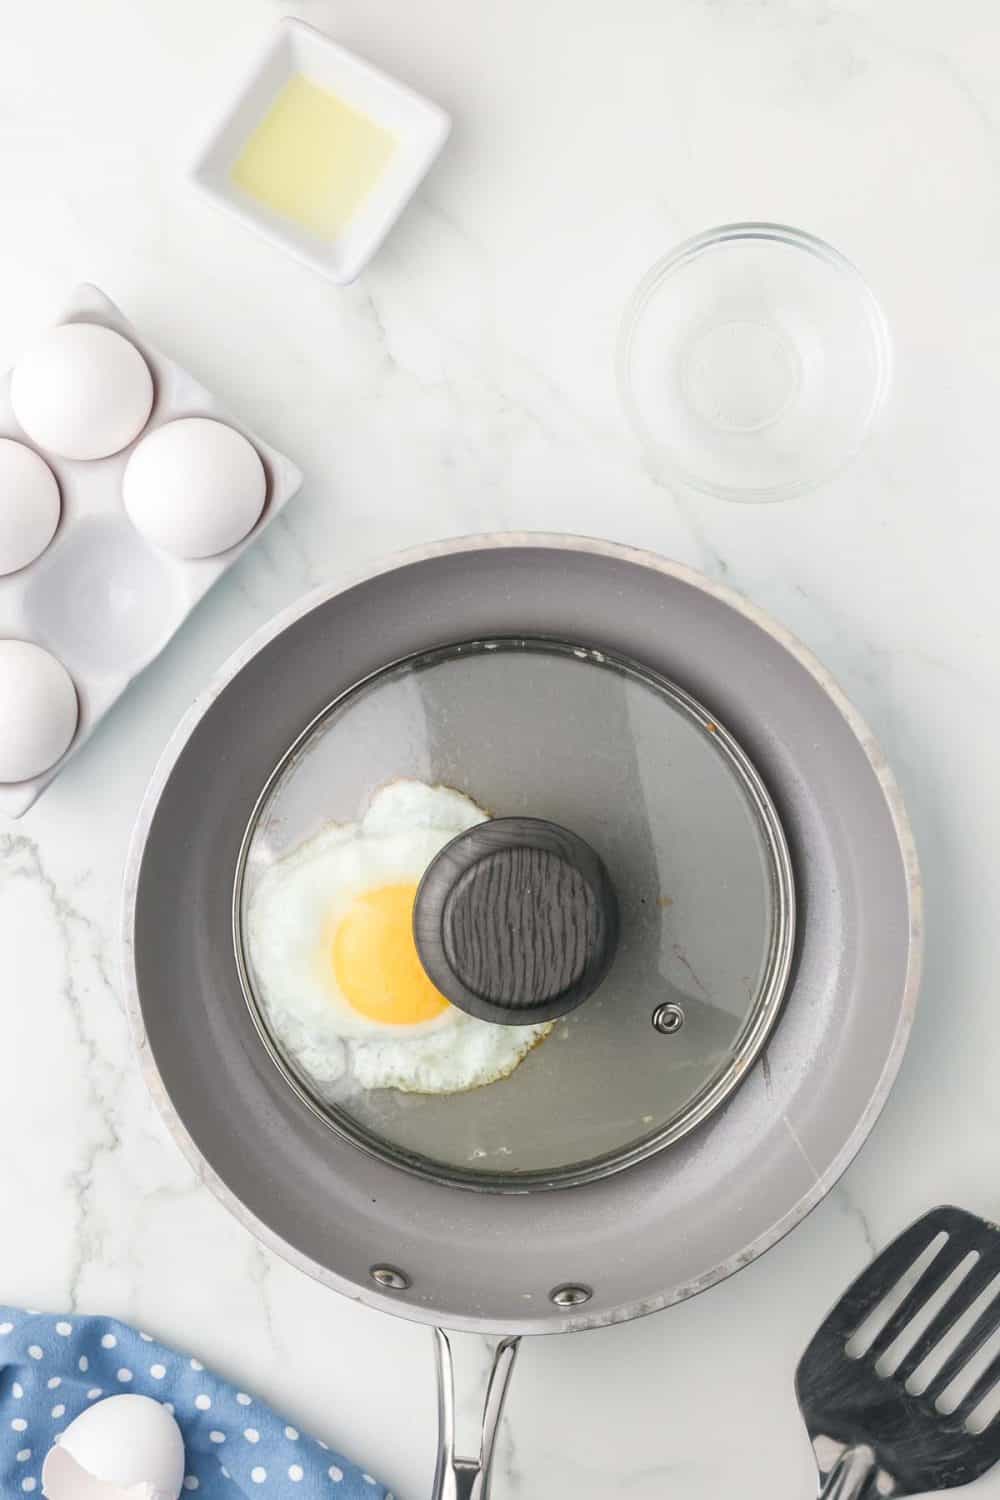 sautéed pan with an egg cooking and a lid over it